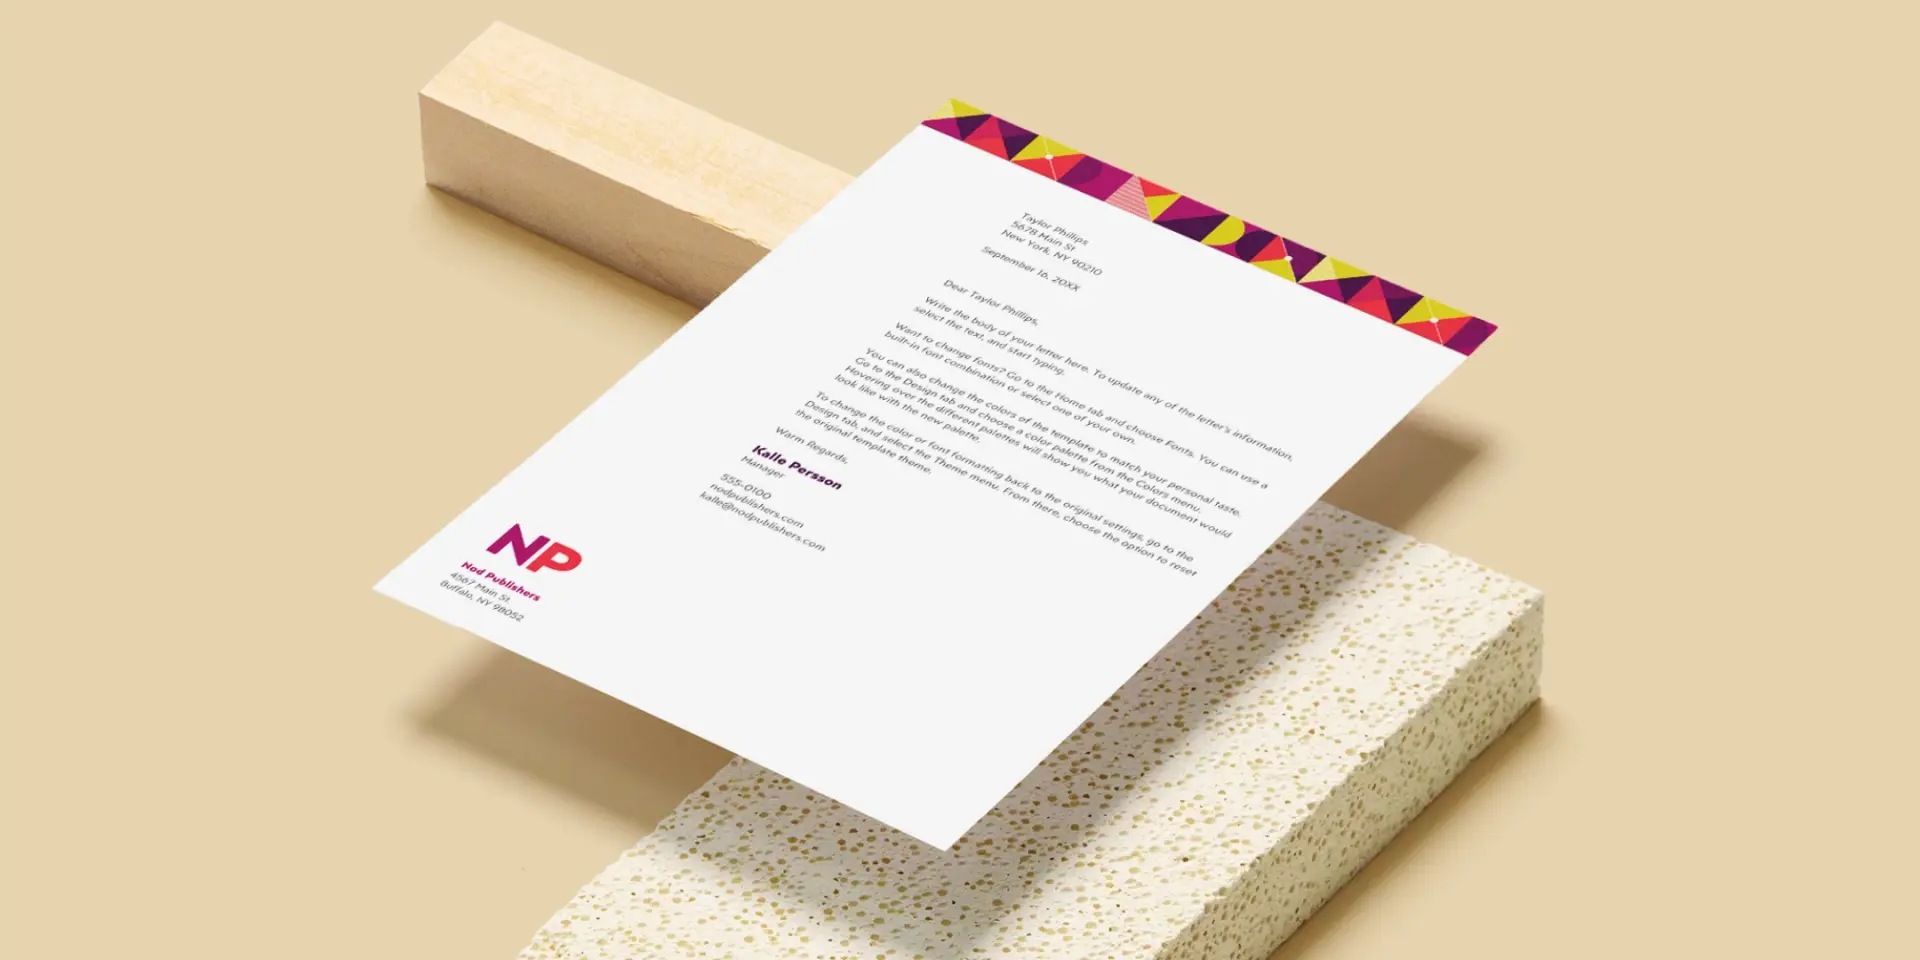 A letter printed on colorful stationery.